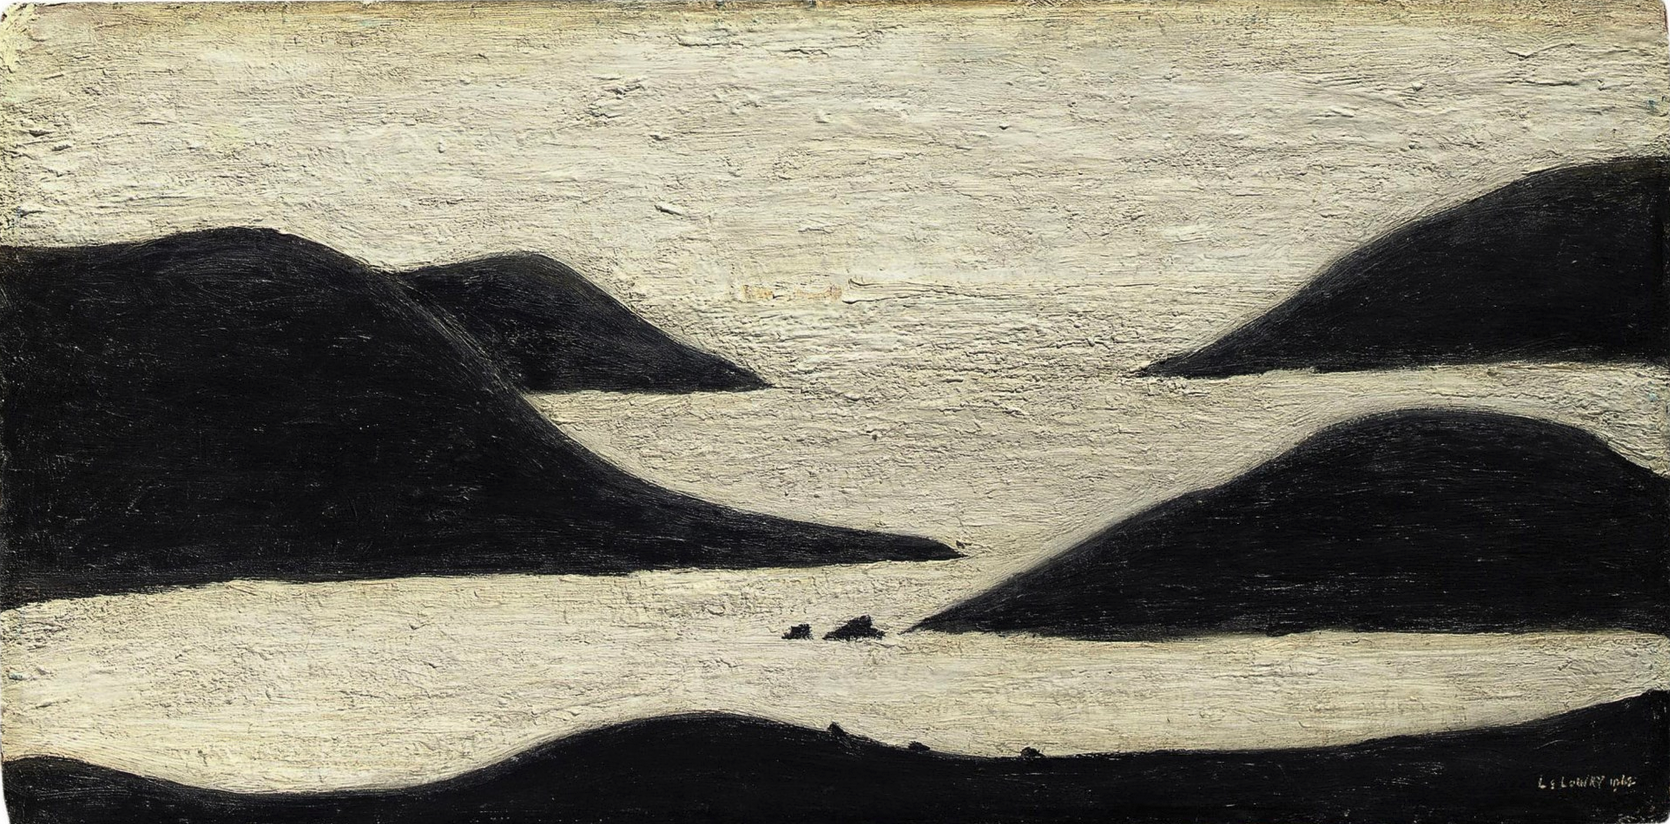 Seascape (1962) by Laurence Stephen Lowry (1887 - 1976), English artist.